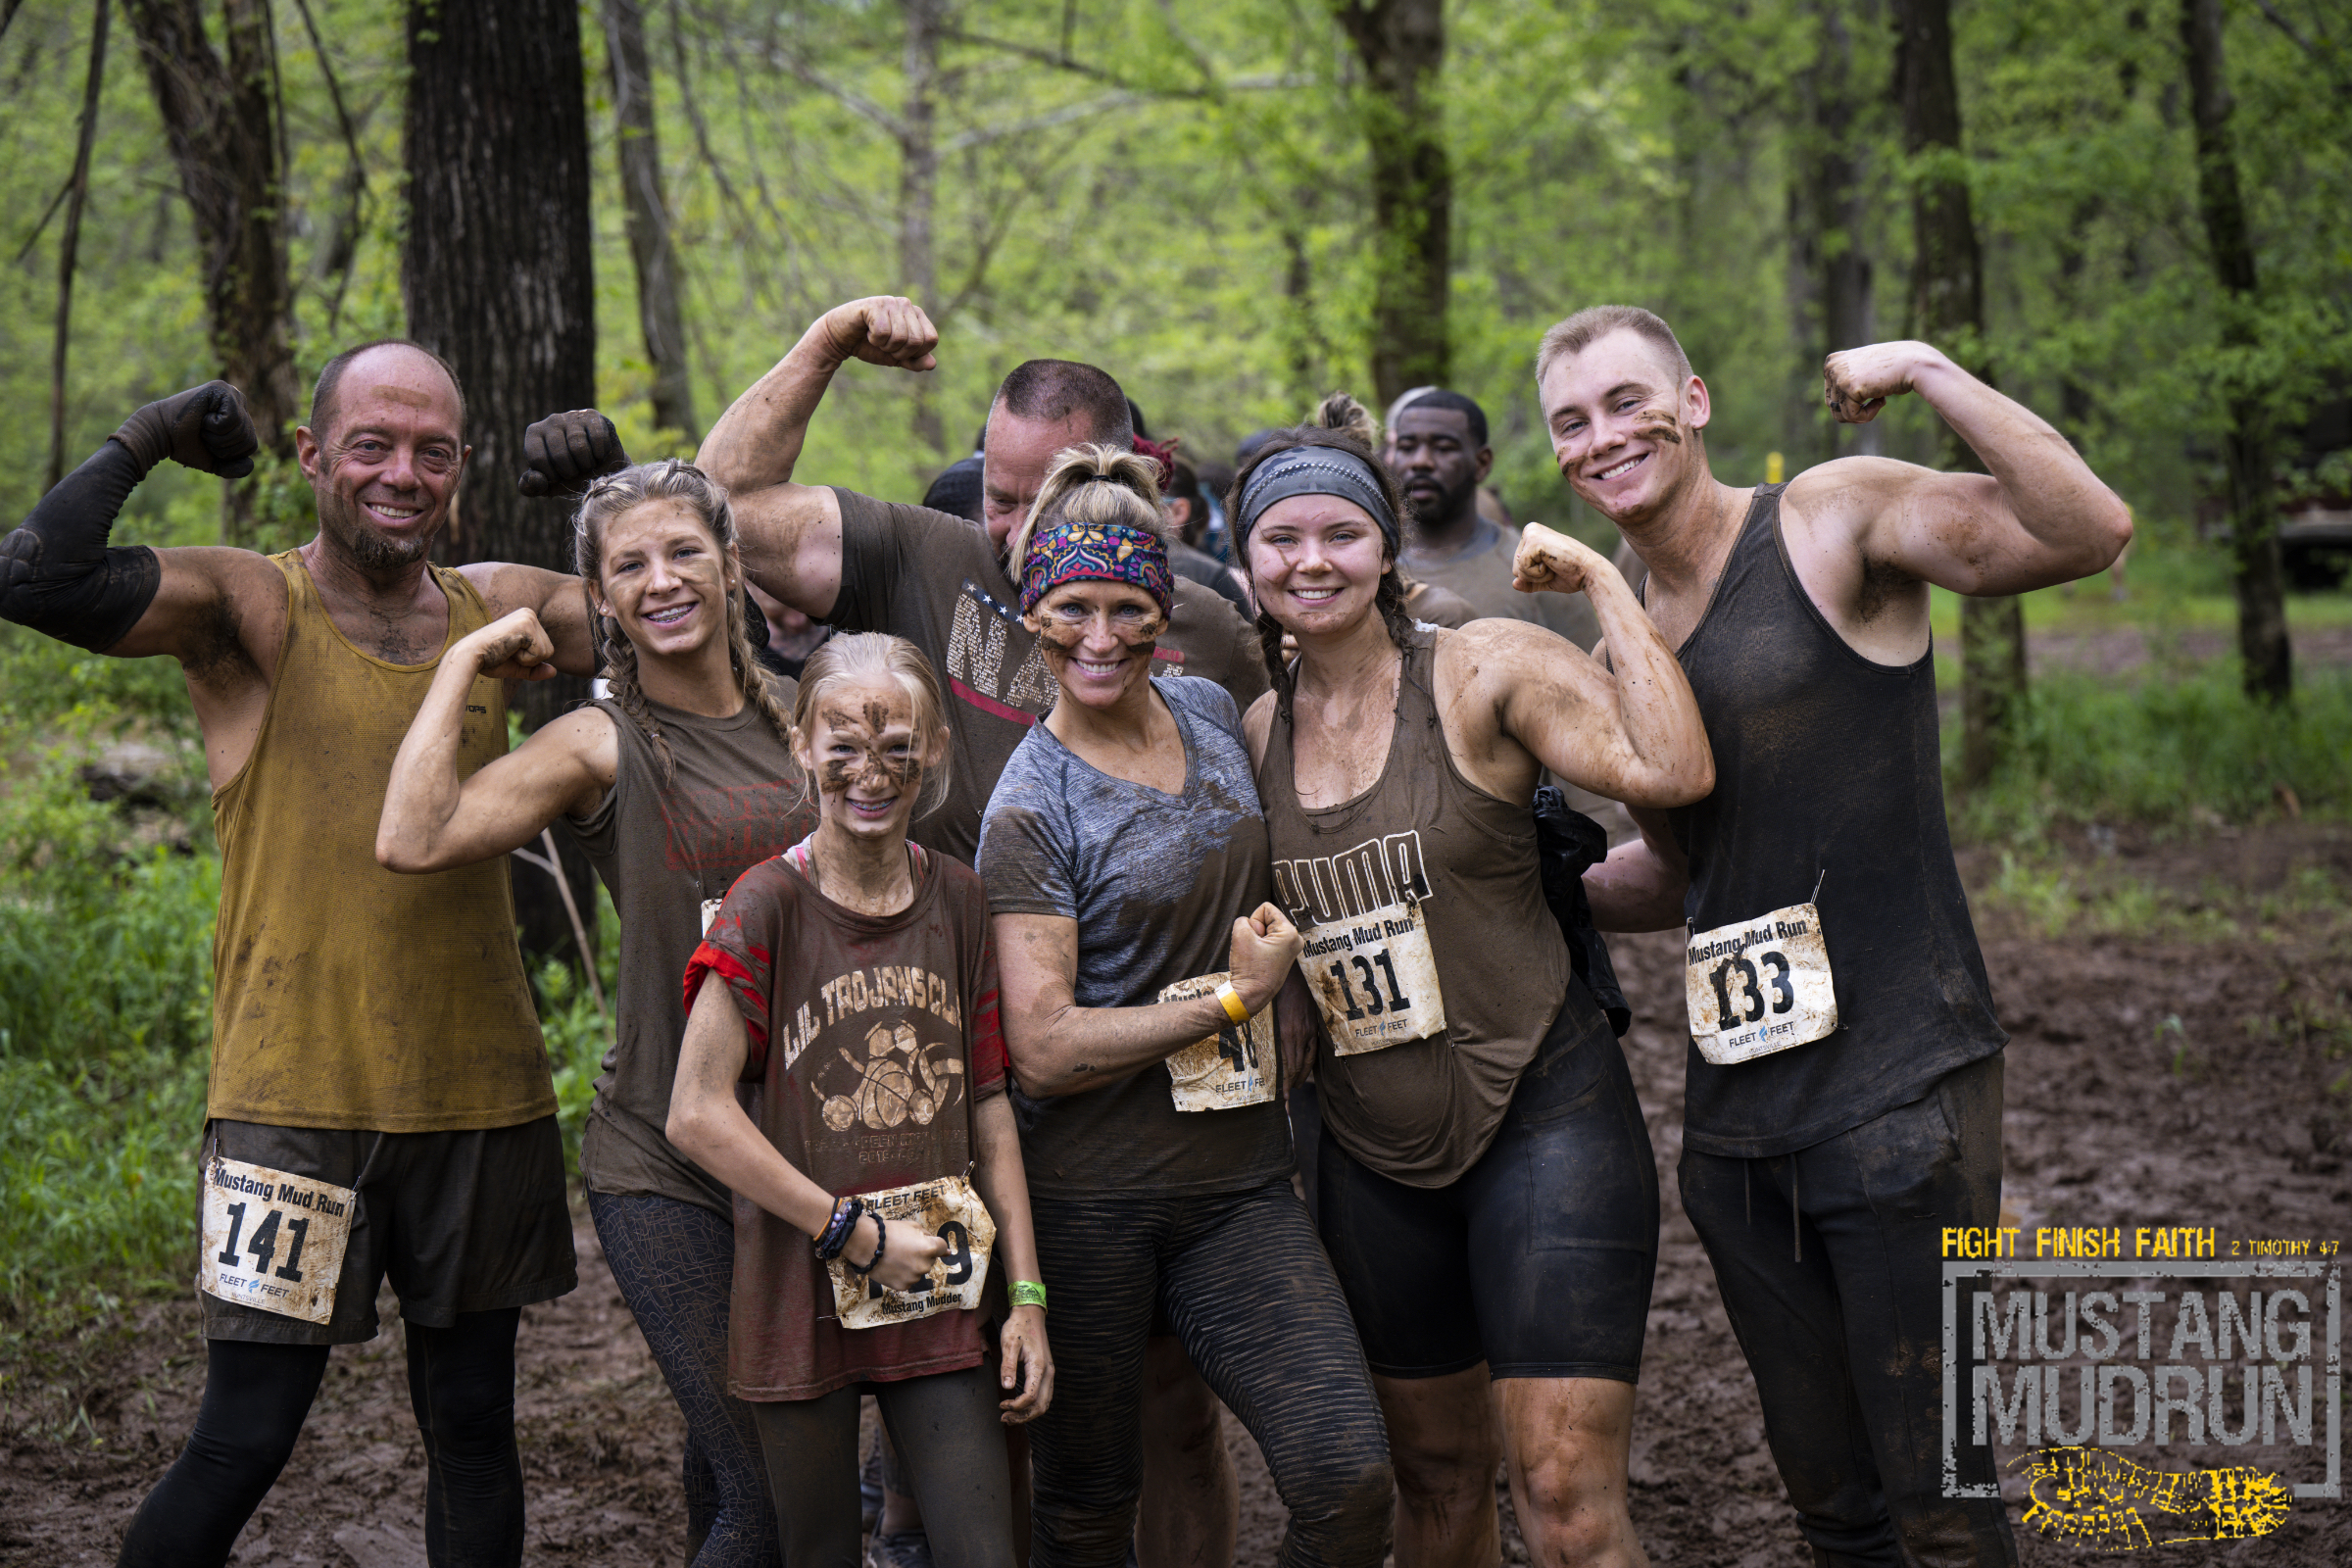 Mustang Mud Run Is For Everyone- Scheduled For April 15 - The